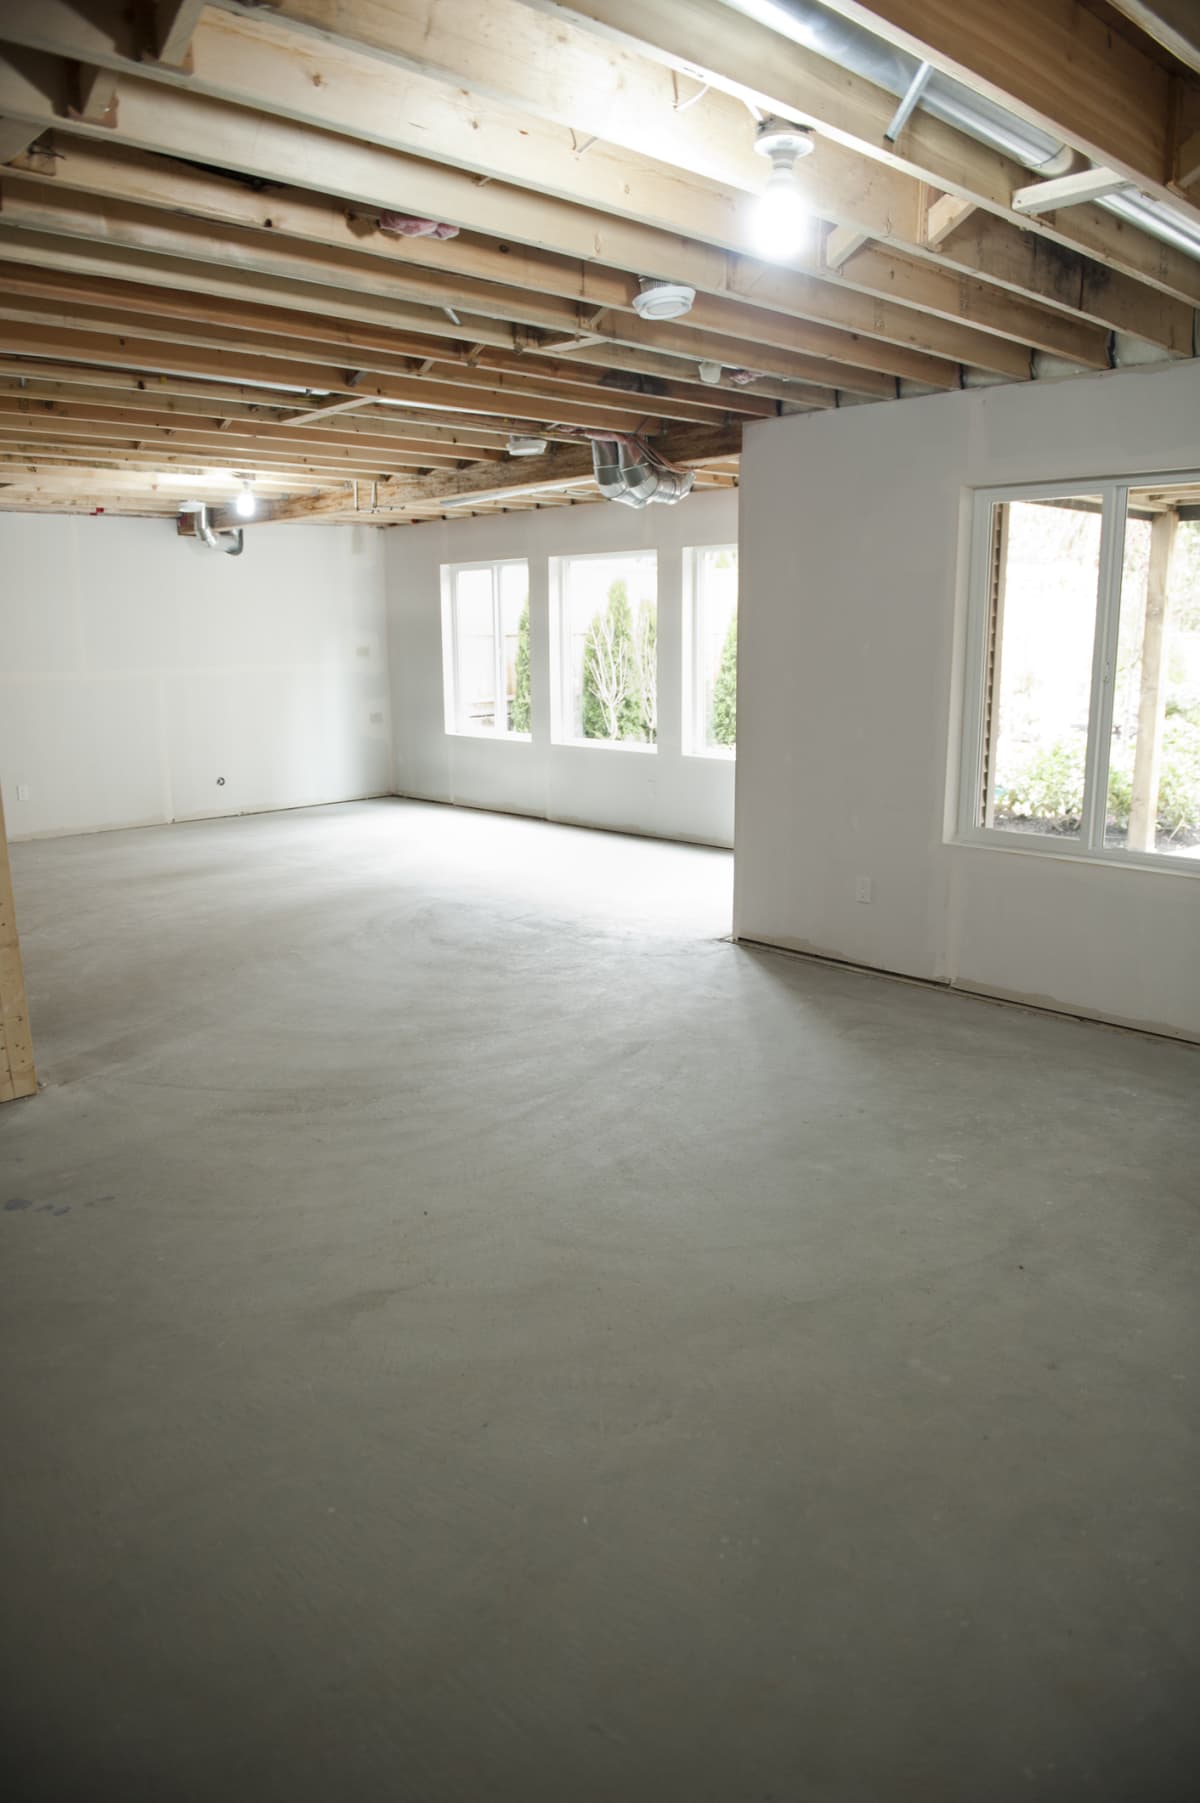 Unfinished basement with white walls